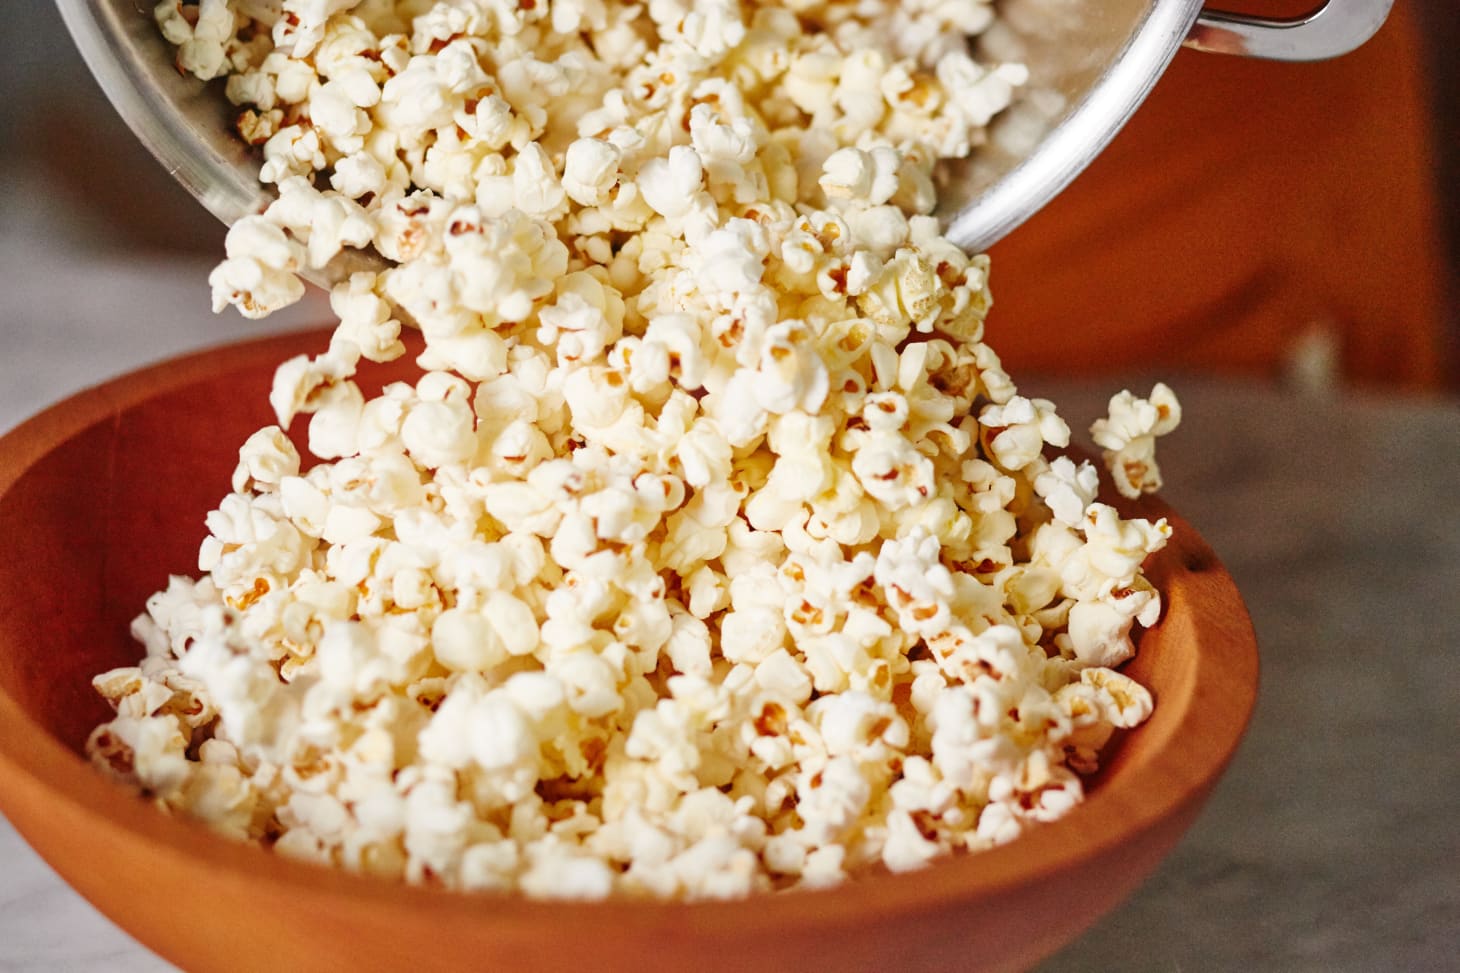 How To Make the Best Buttery, Movie-Style Popcorn | Kitchn